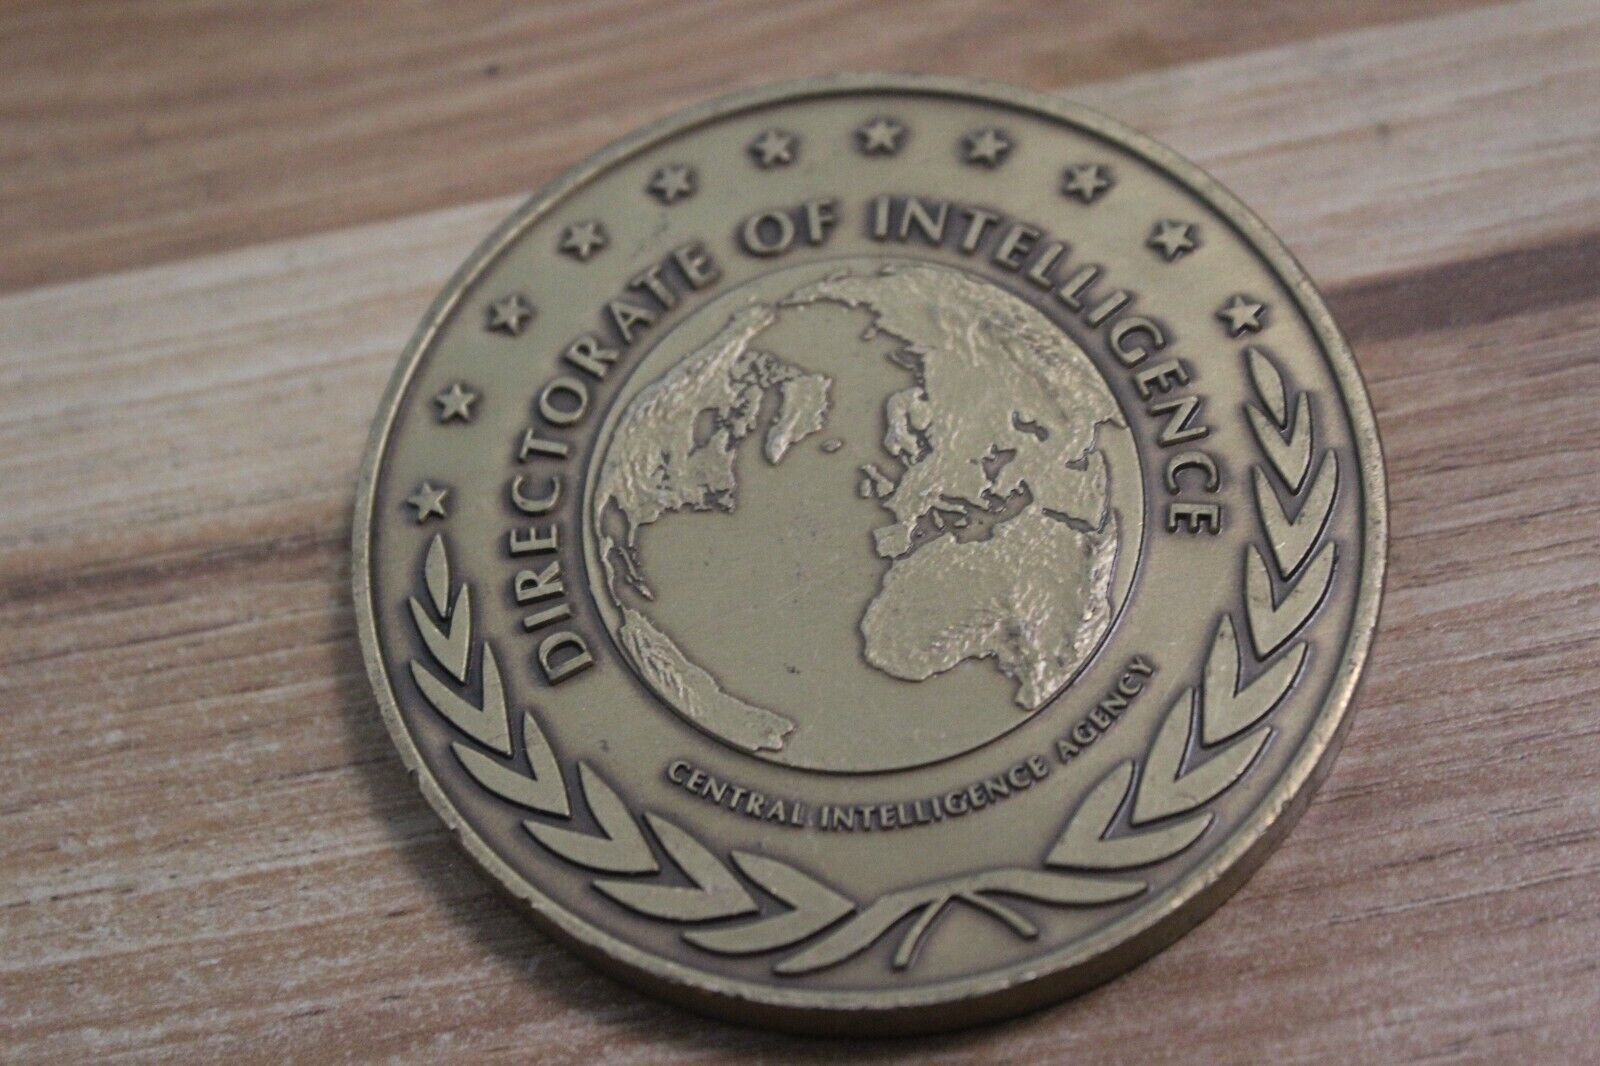 CIA Directorate of Intelligence Challenge Coin